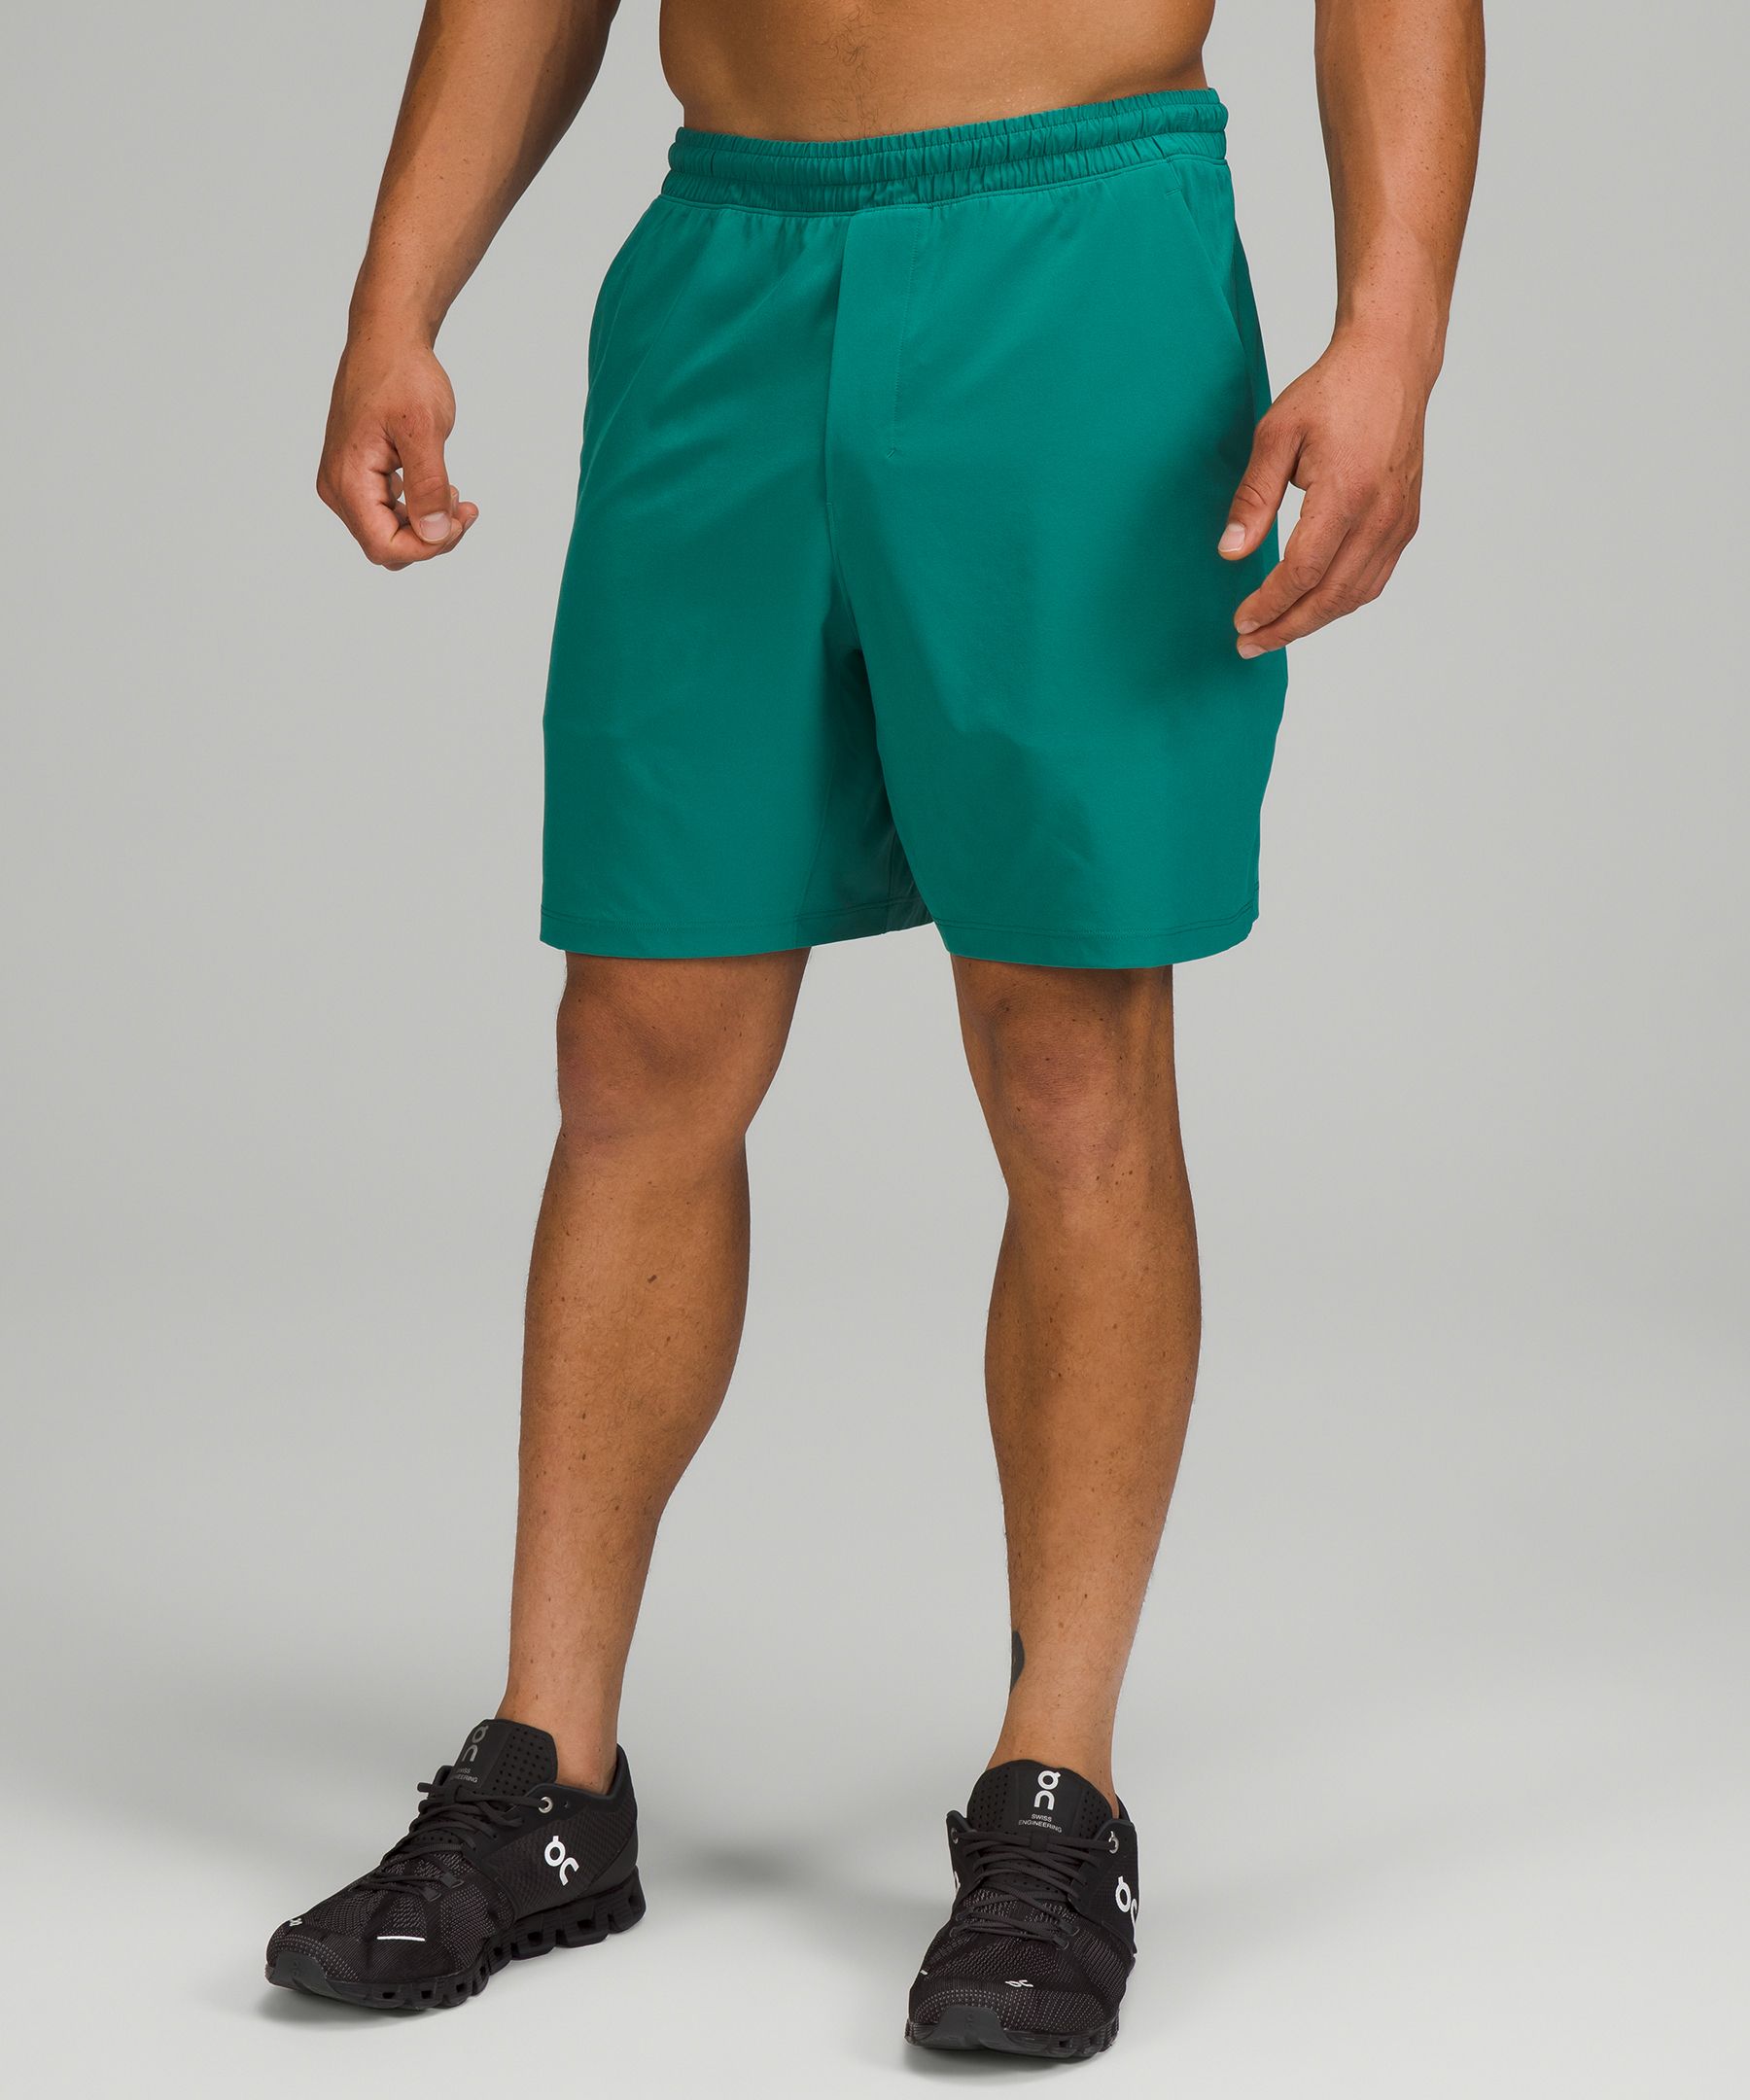 Lululemon Pace Breaker Lined Shorts 7" In Teal Lagoon